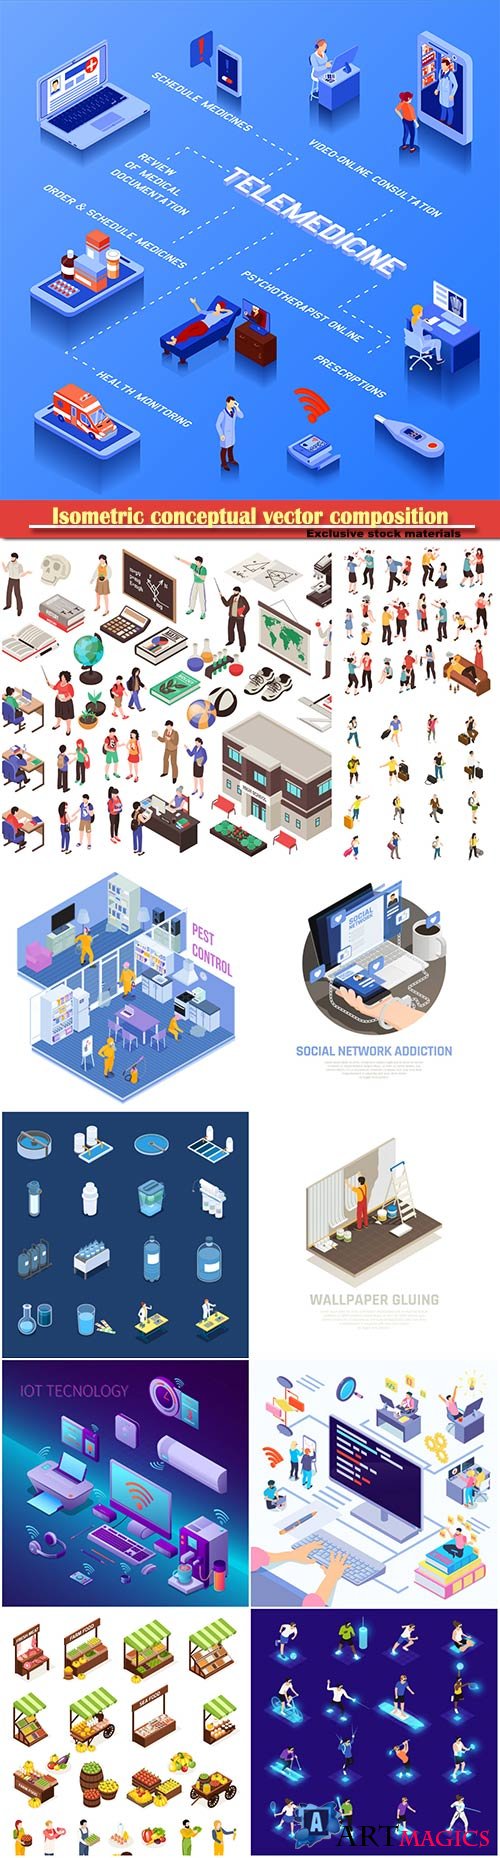 Isometric conceptual vector composition, infographics template # 60